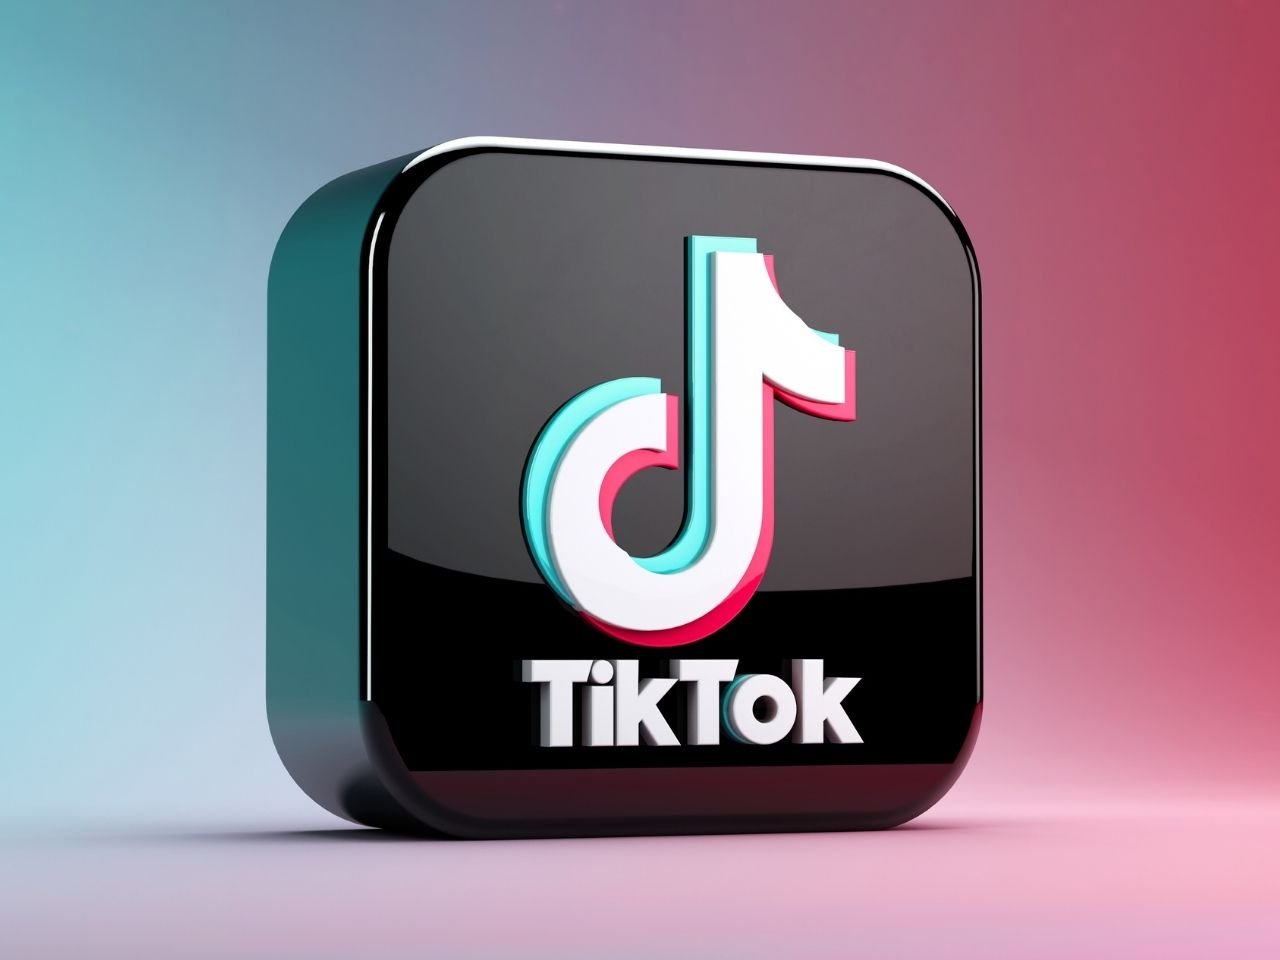 5 Brands on TikTok That Succeeded (and How They Did It)